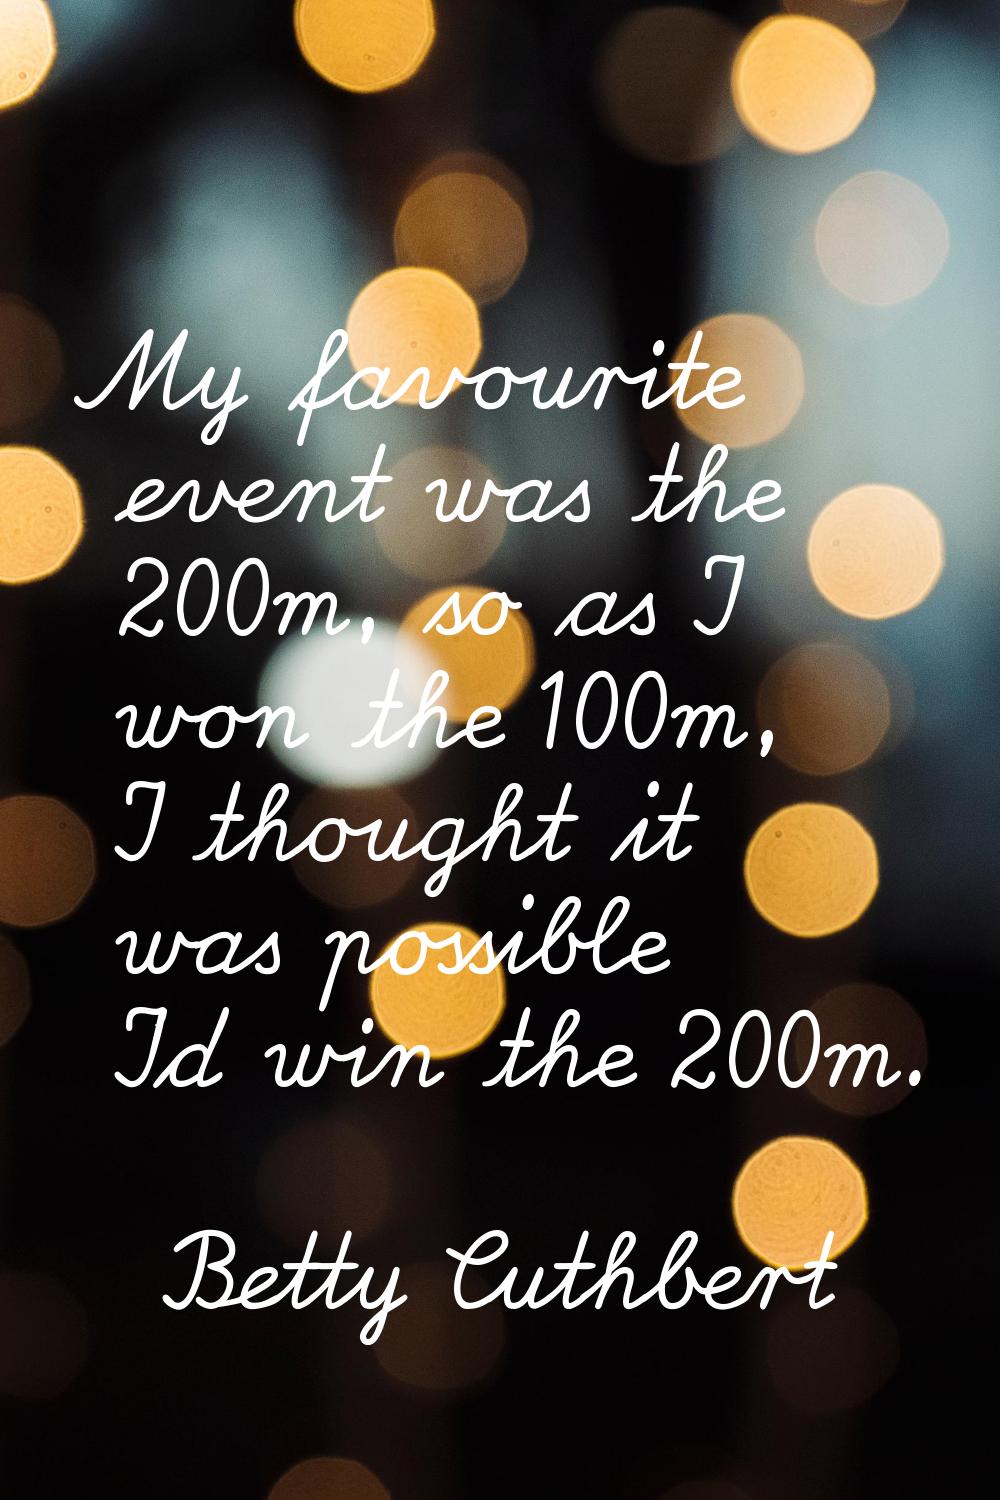 My favourite event was the 200m, so as I won the 100m, I thought it was possible I'd win the 200m.